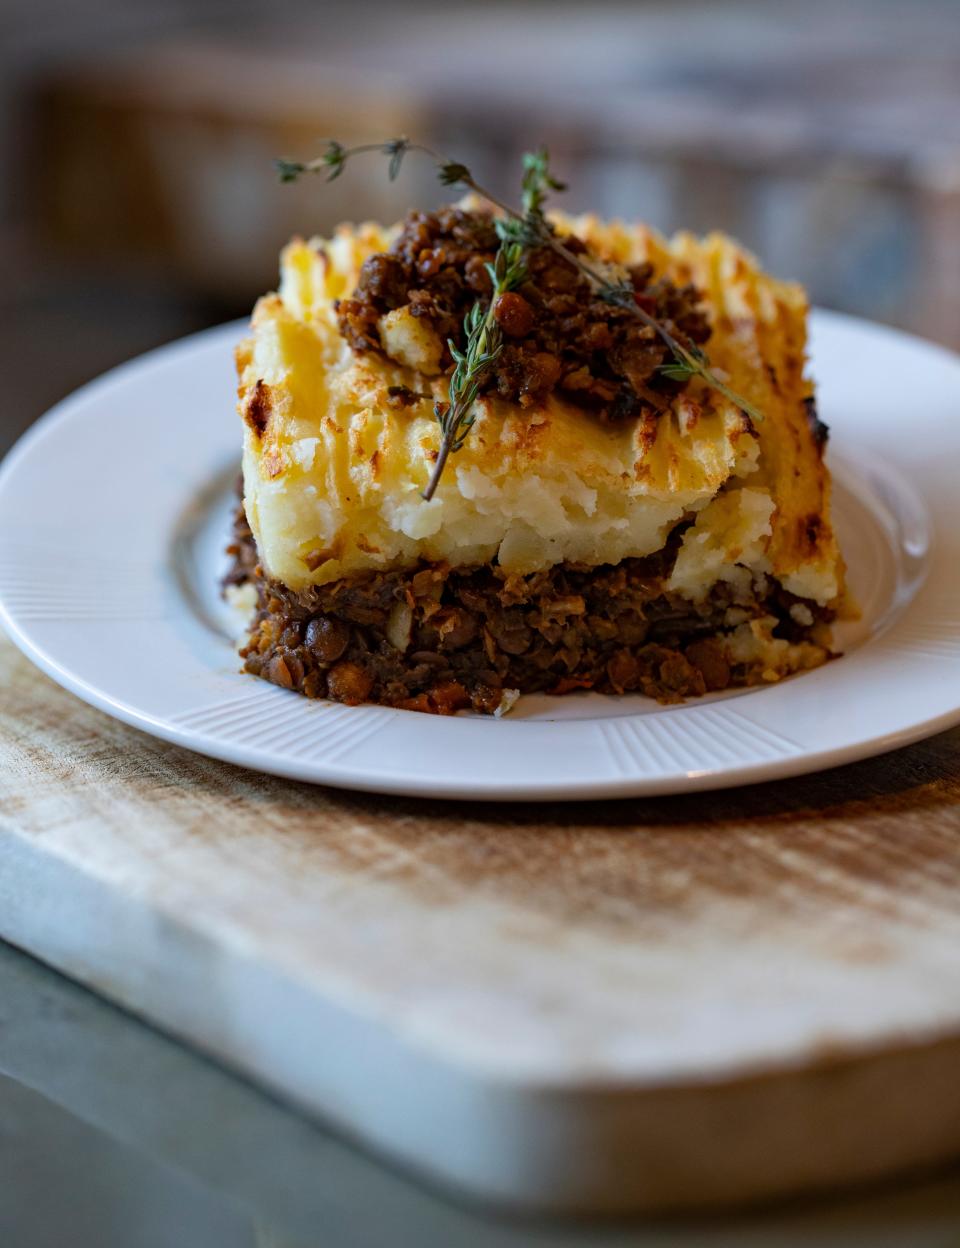 Shepherd's pie with garlic mashed potato topping and including onions, carrots and mushrooms by Cape Coral Chef Lisa Brown